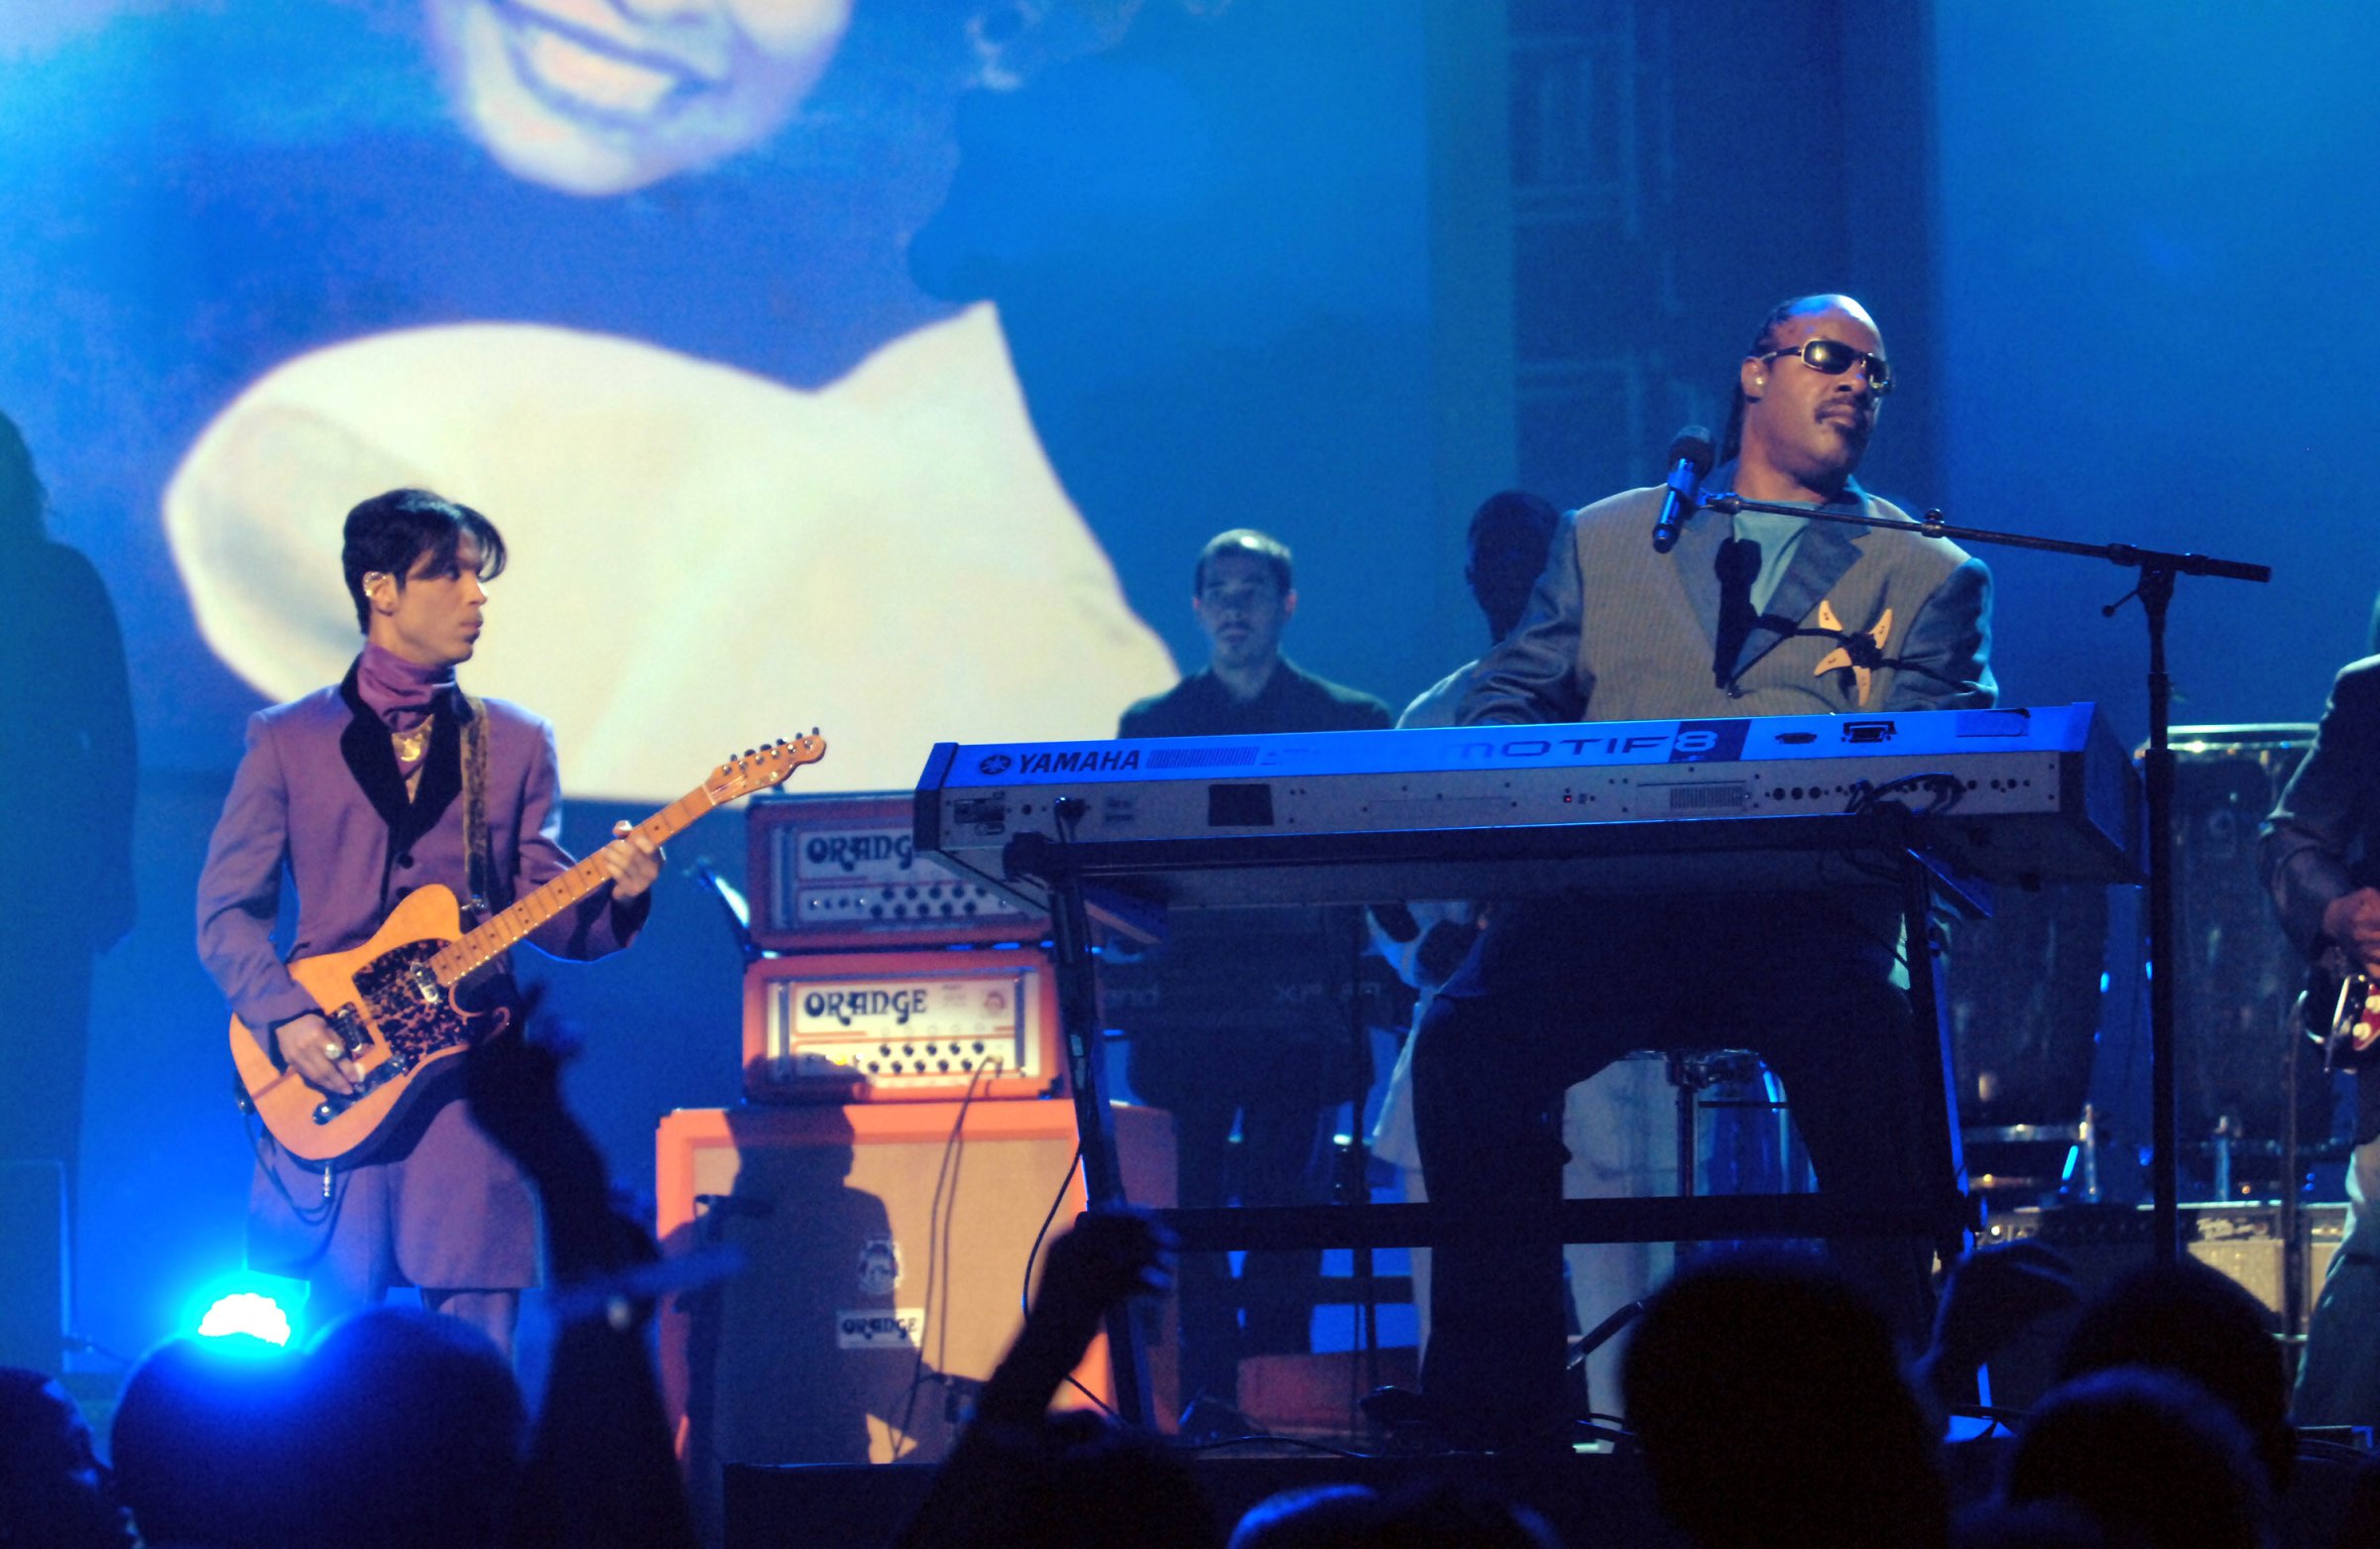 Prince and Stevie Wonder perform "Through the Fire" at the 6th Annual BET Awards in 2006.